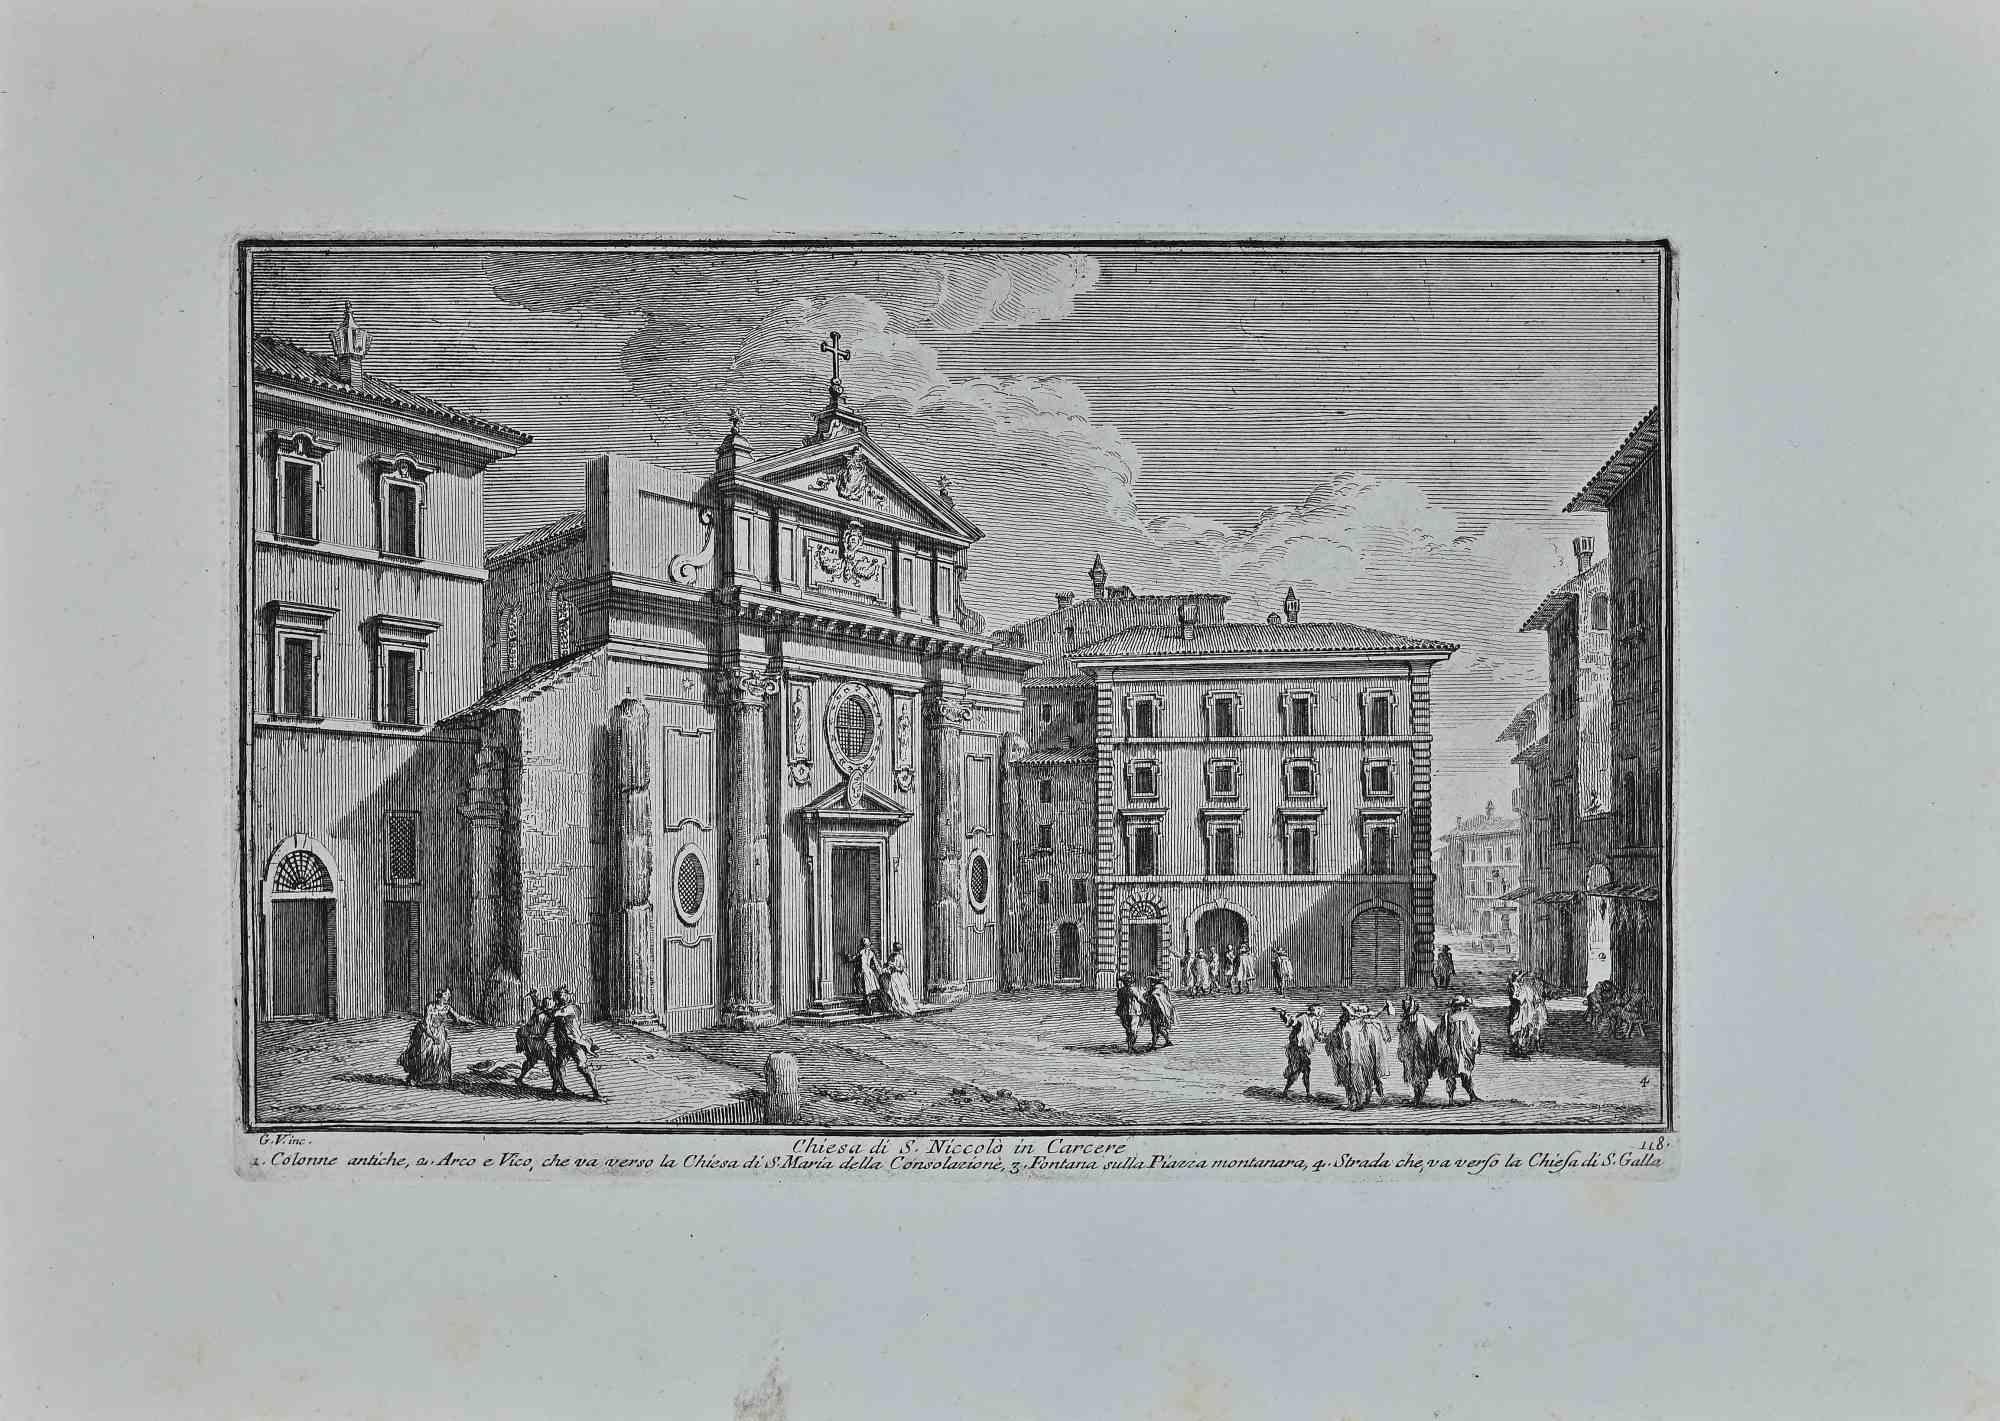 S.Niccolo in Carcere Church is an original etching of the Late 18th century realized by Giuseppe Vasi.

Signed and titled on plate lower margin. 

Good conditions.

Giuseppe Vasi  (Corleone,1710 - Rome, 1782) was an engraver, architect, and